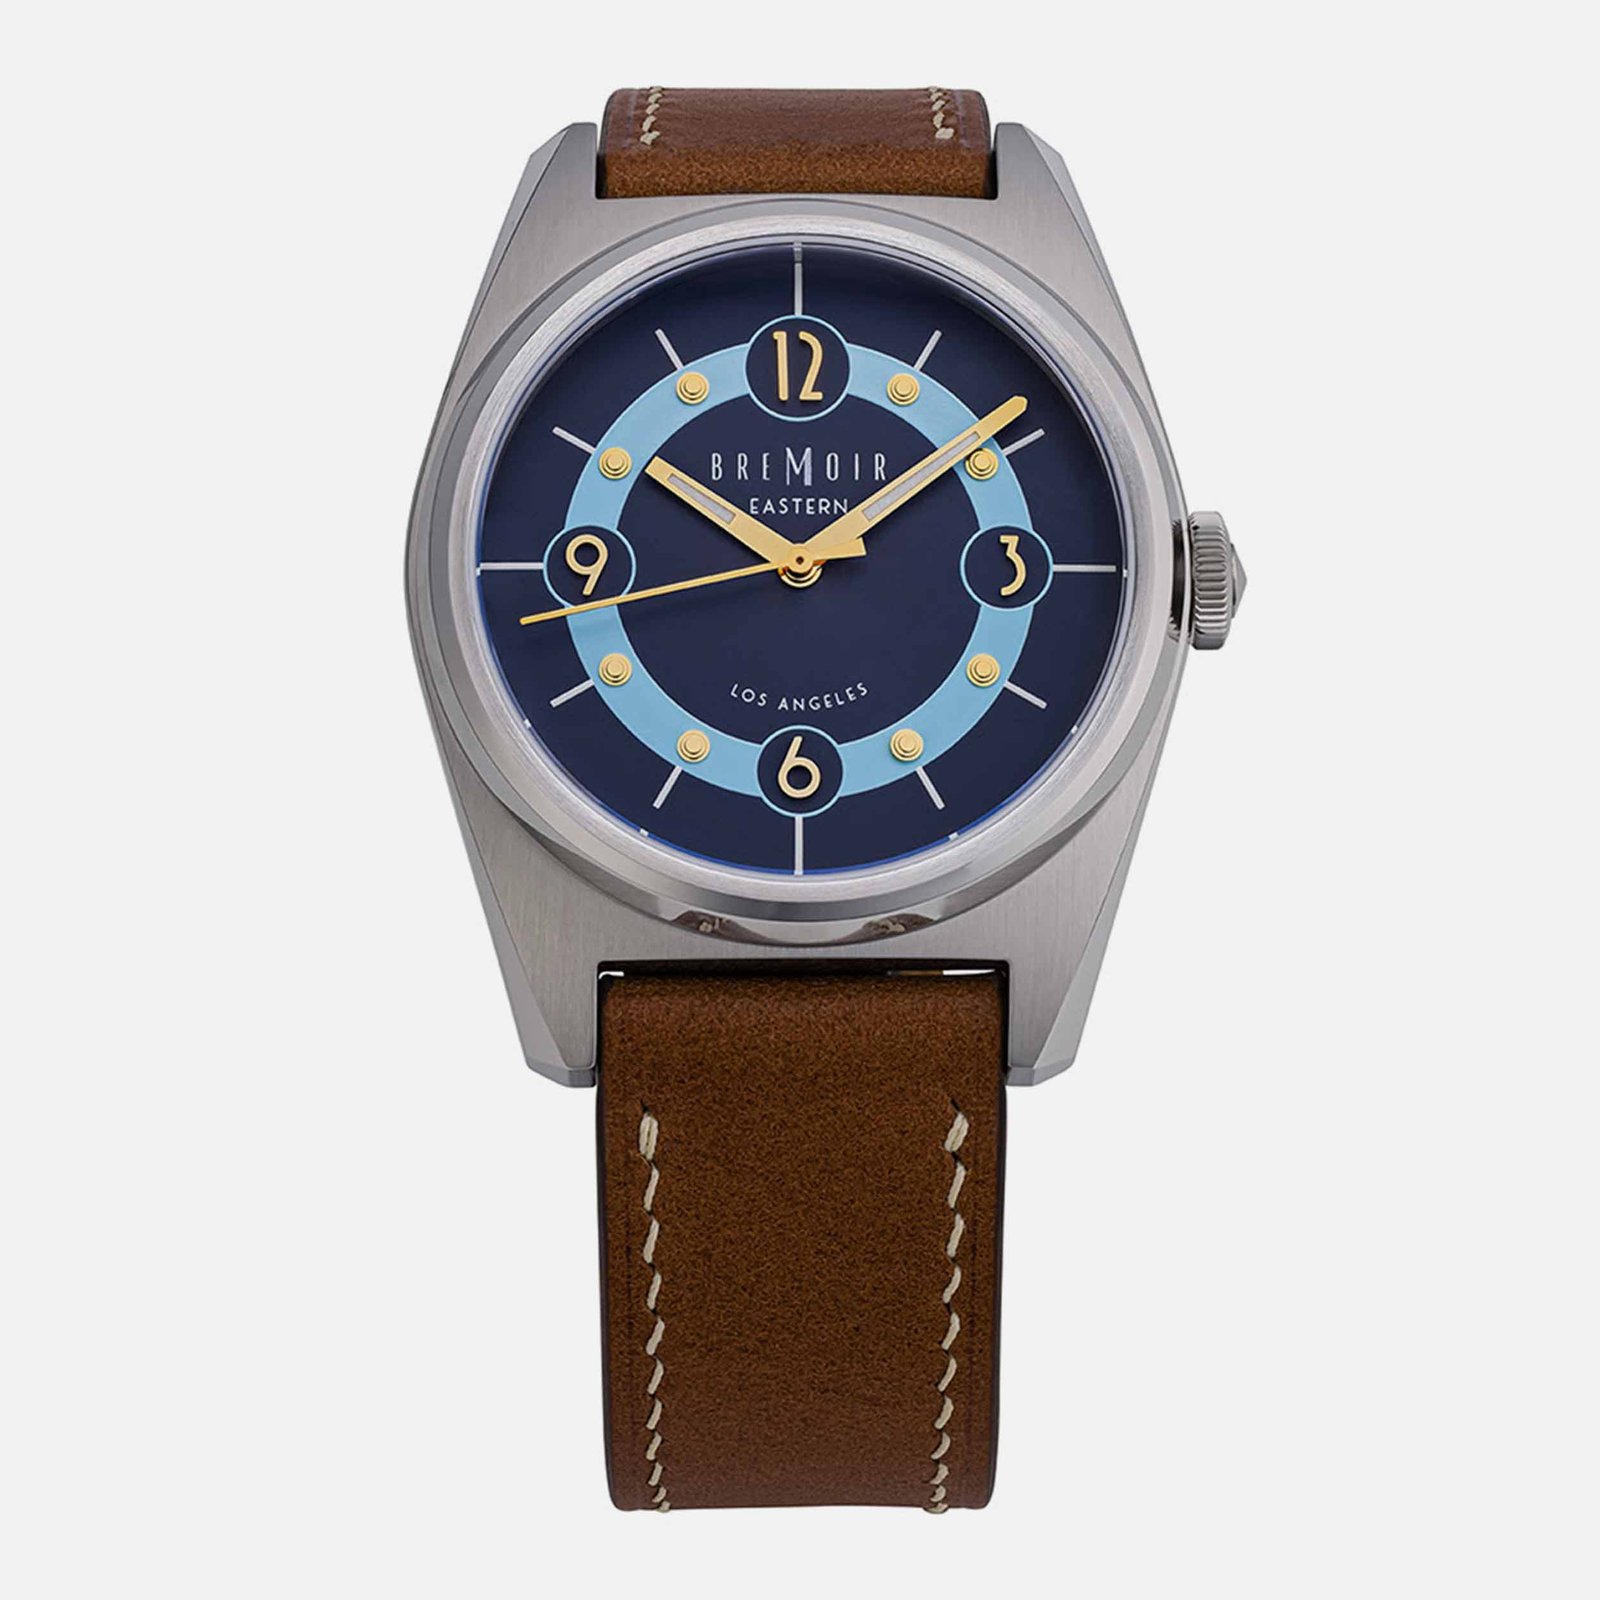 Bremoir Introduces the Eastern, a New Watch Inspired by a Los Angeles Art Deco Classic